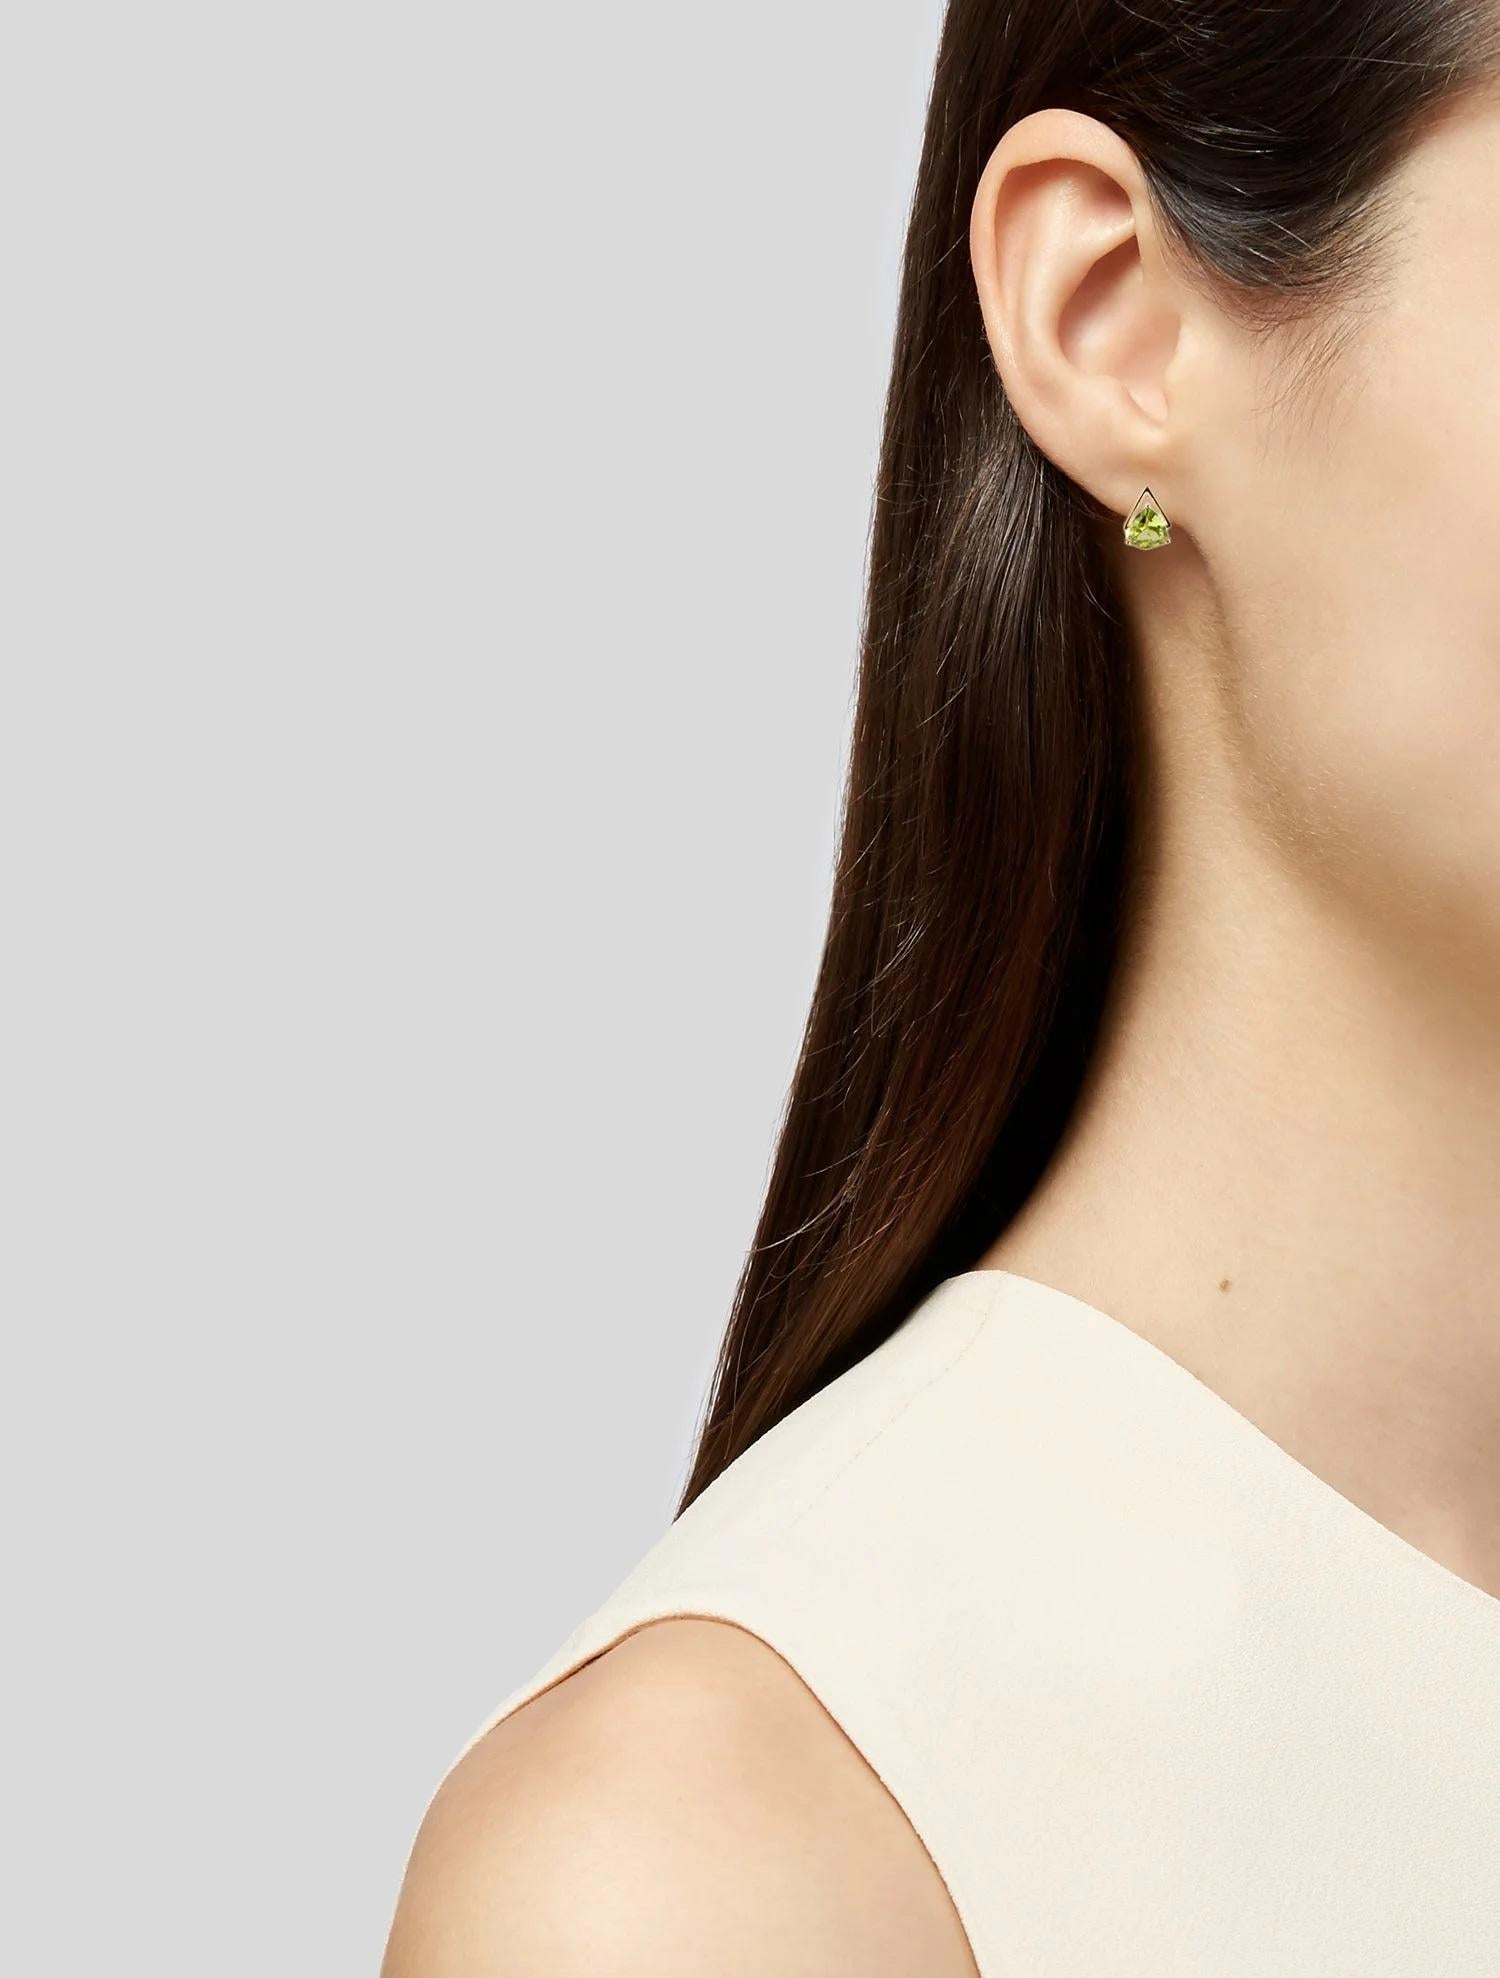 Elevate your look with these stunning 14K Peridot Stud Earrings. Crafted from lustrous yellow gold, each earring features two modified triangular brilliant peridots, known for their vibrant green hue and eye-catching sparkle. The modern design and